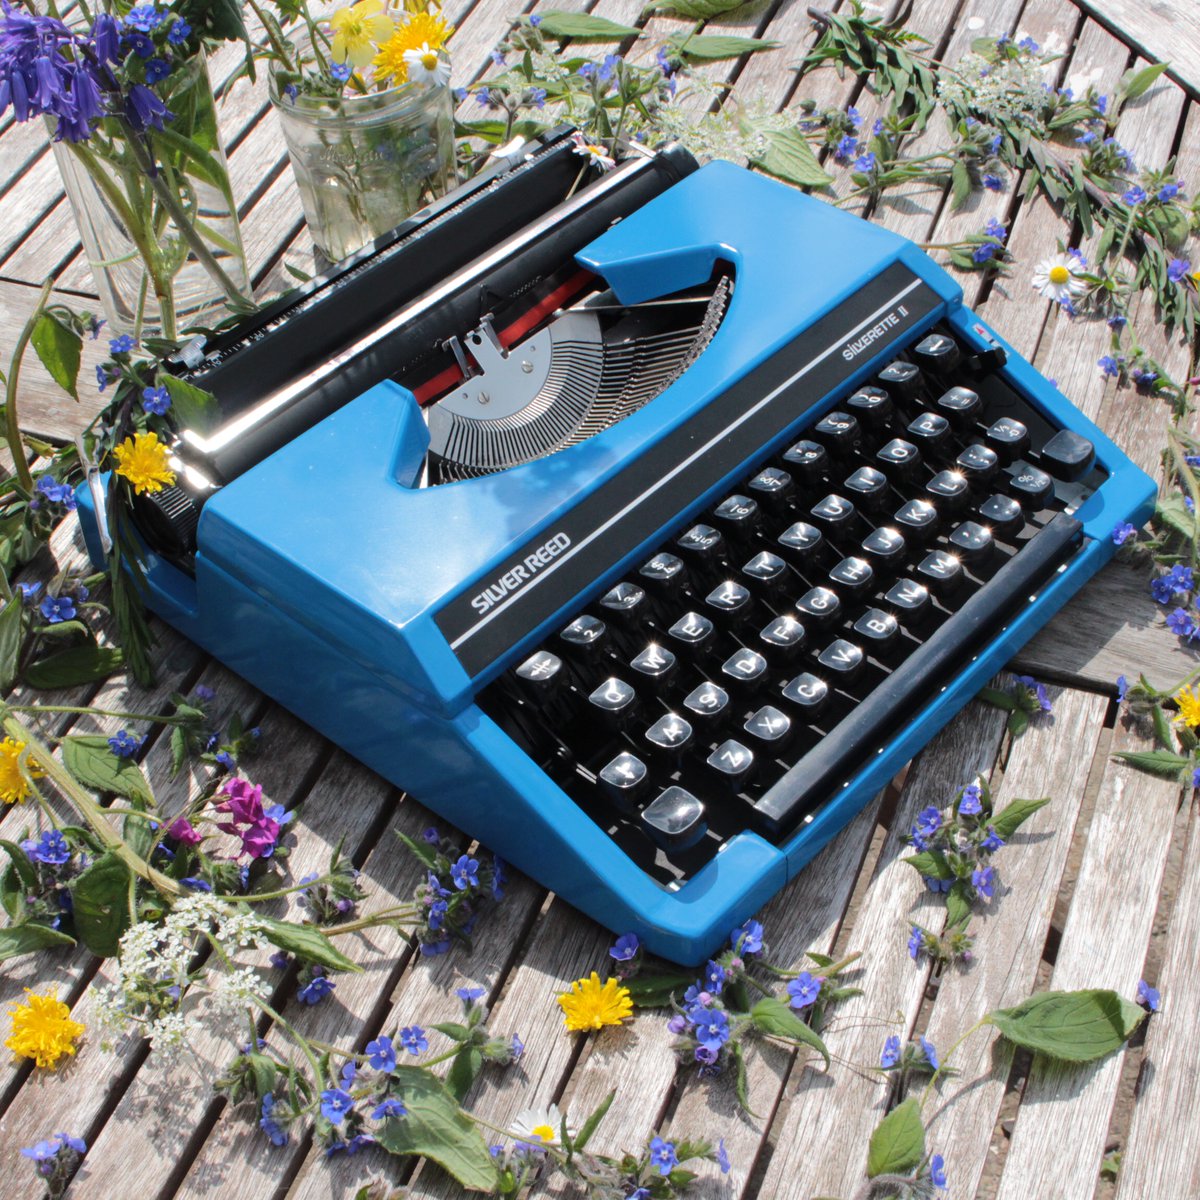 The smell of fresh-cut grass with the click-clacking of your #typewriter as you listening to your favourite summer songs, not long to go now for the brighter days ahead! 🌞

#SilverReed Silverette II